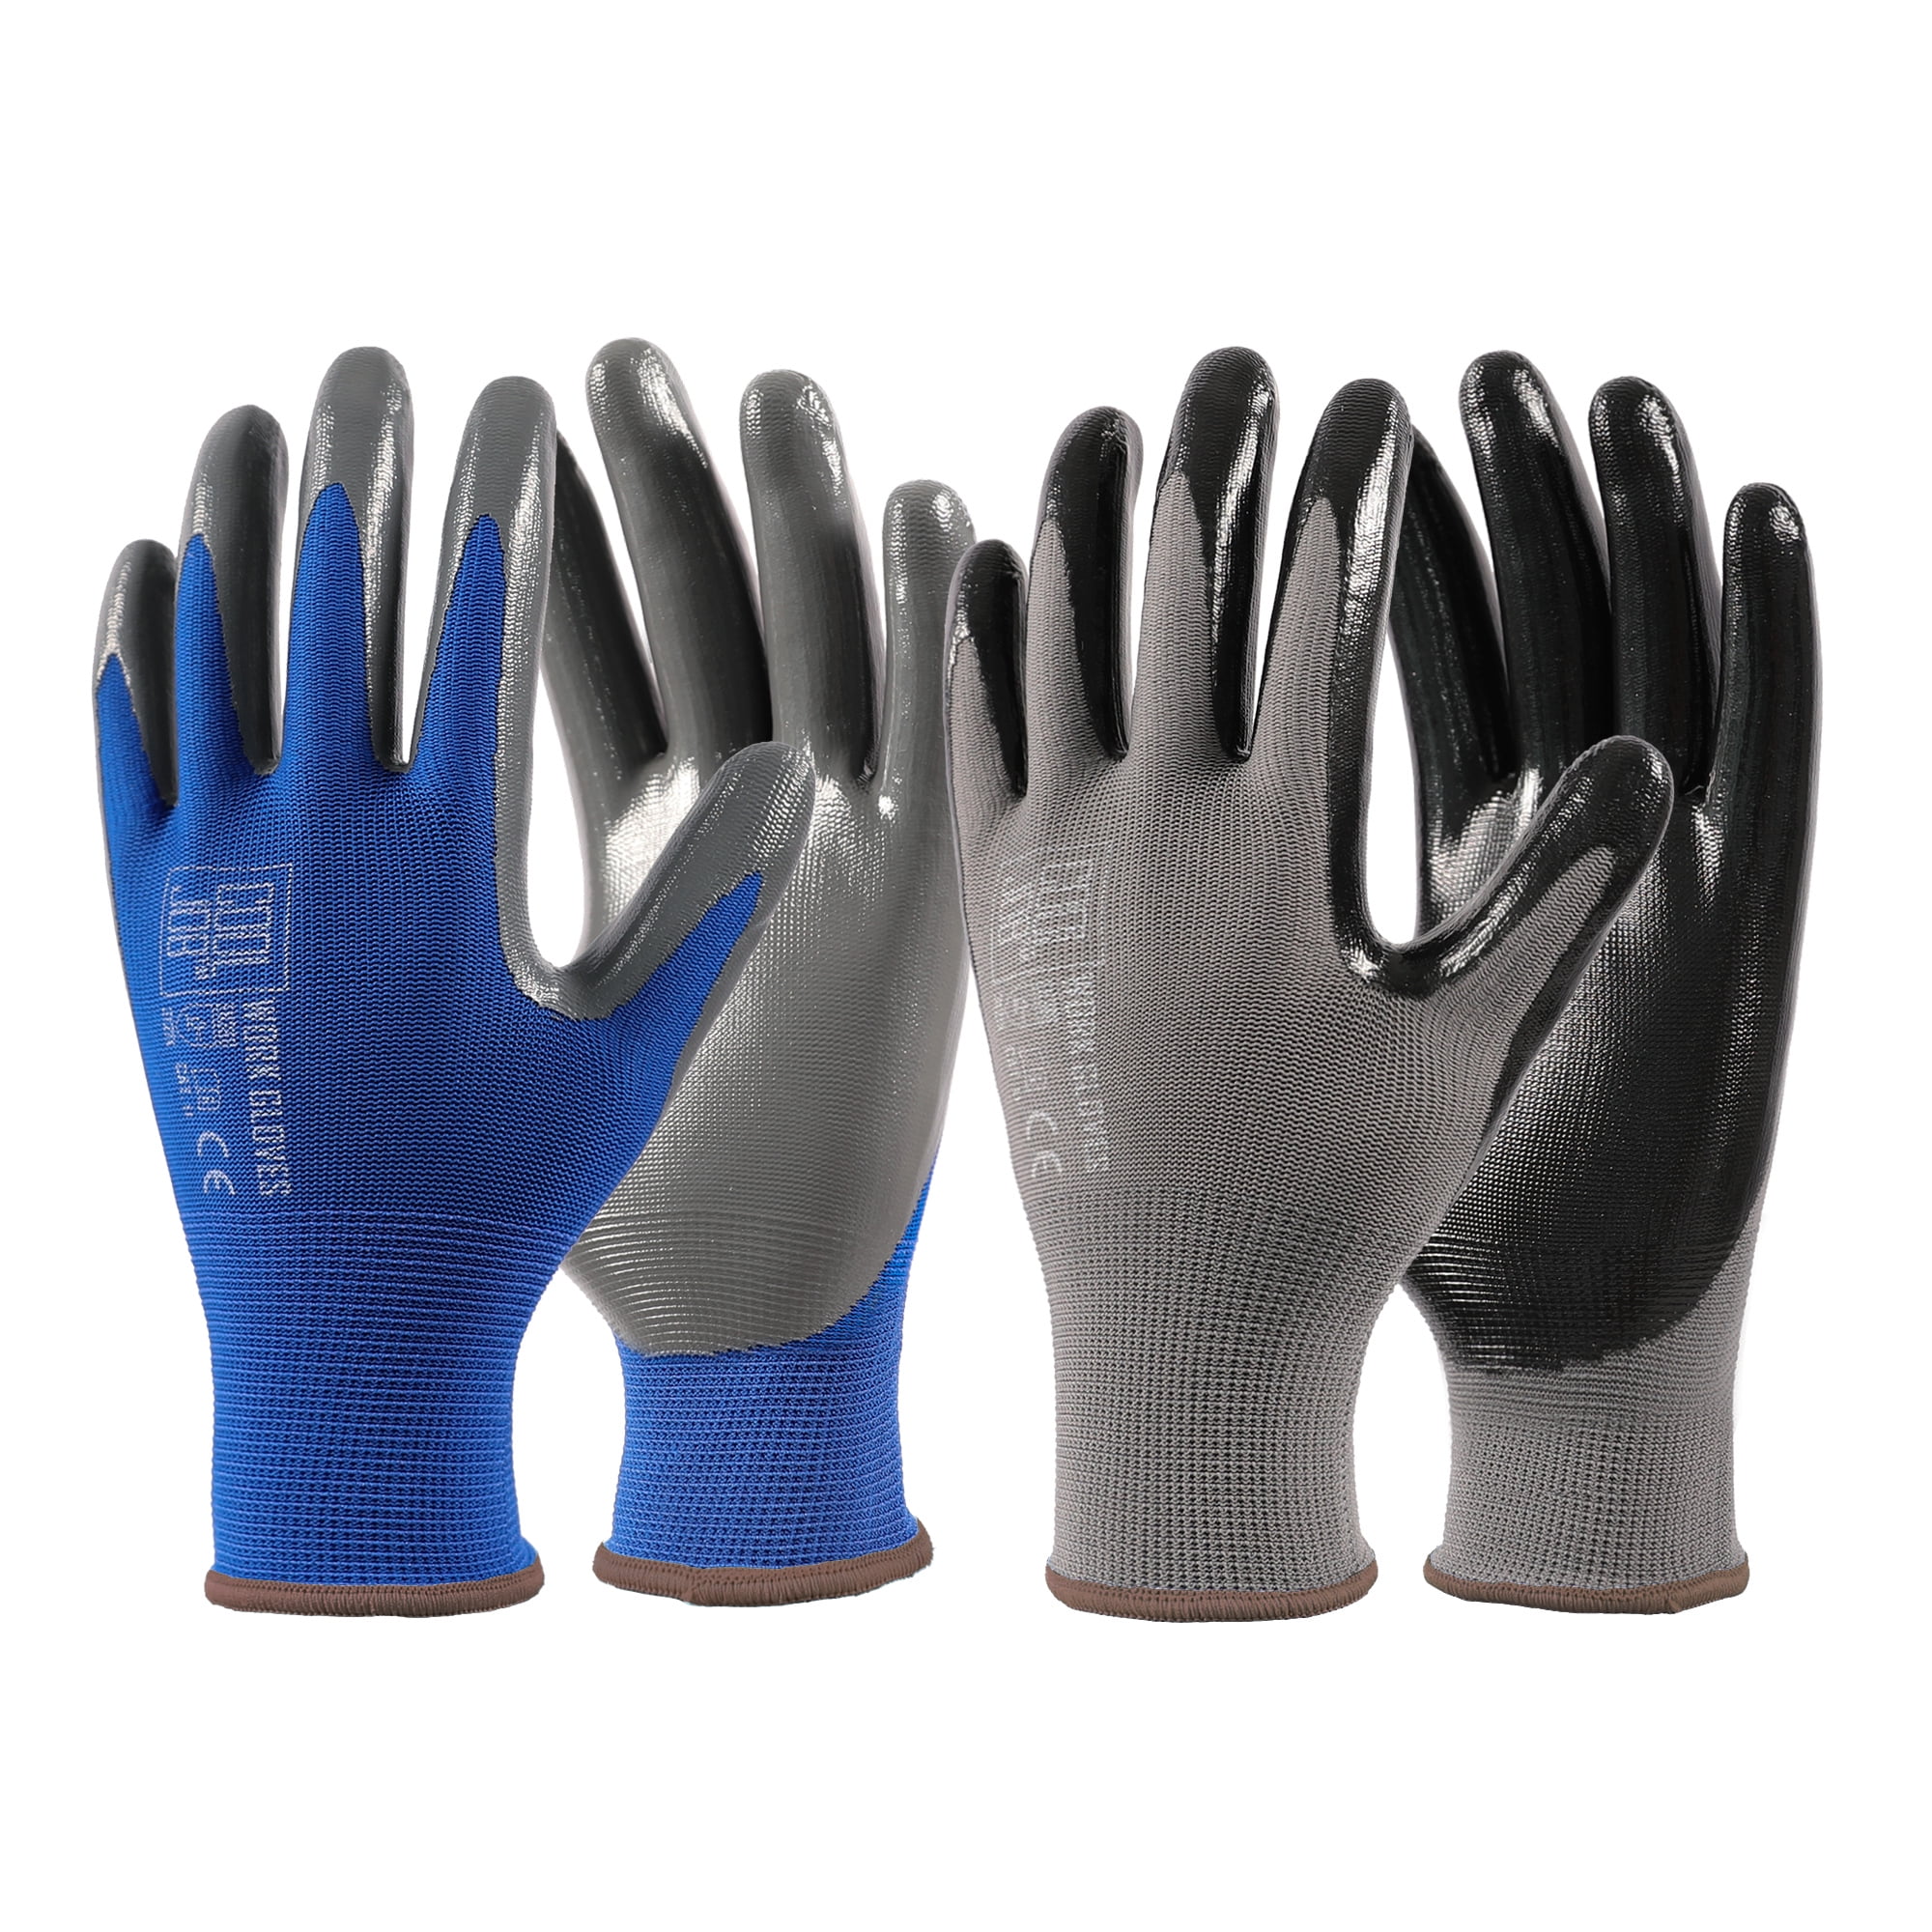 High-Dexterity Reflective Palm Dipped Latex Rubber Work Gloves for Men  Women with Grip Non-Slip, Garden Gloves, Yard Roofing Landscaping Gloves -  China Latex Rubber Coated Gloves and Palm Coating Gloves price